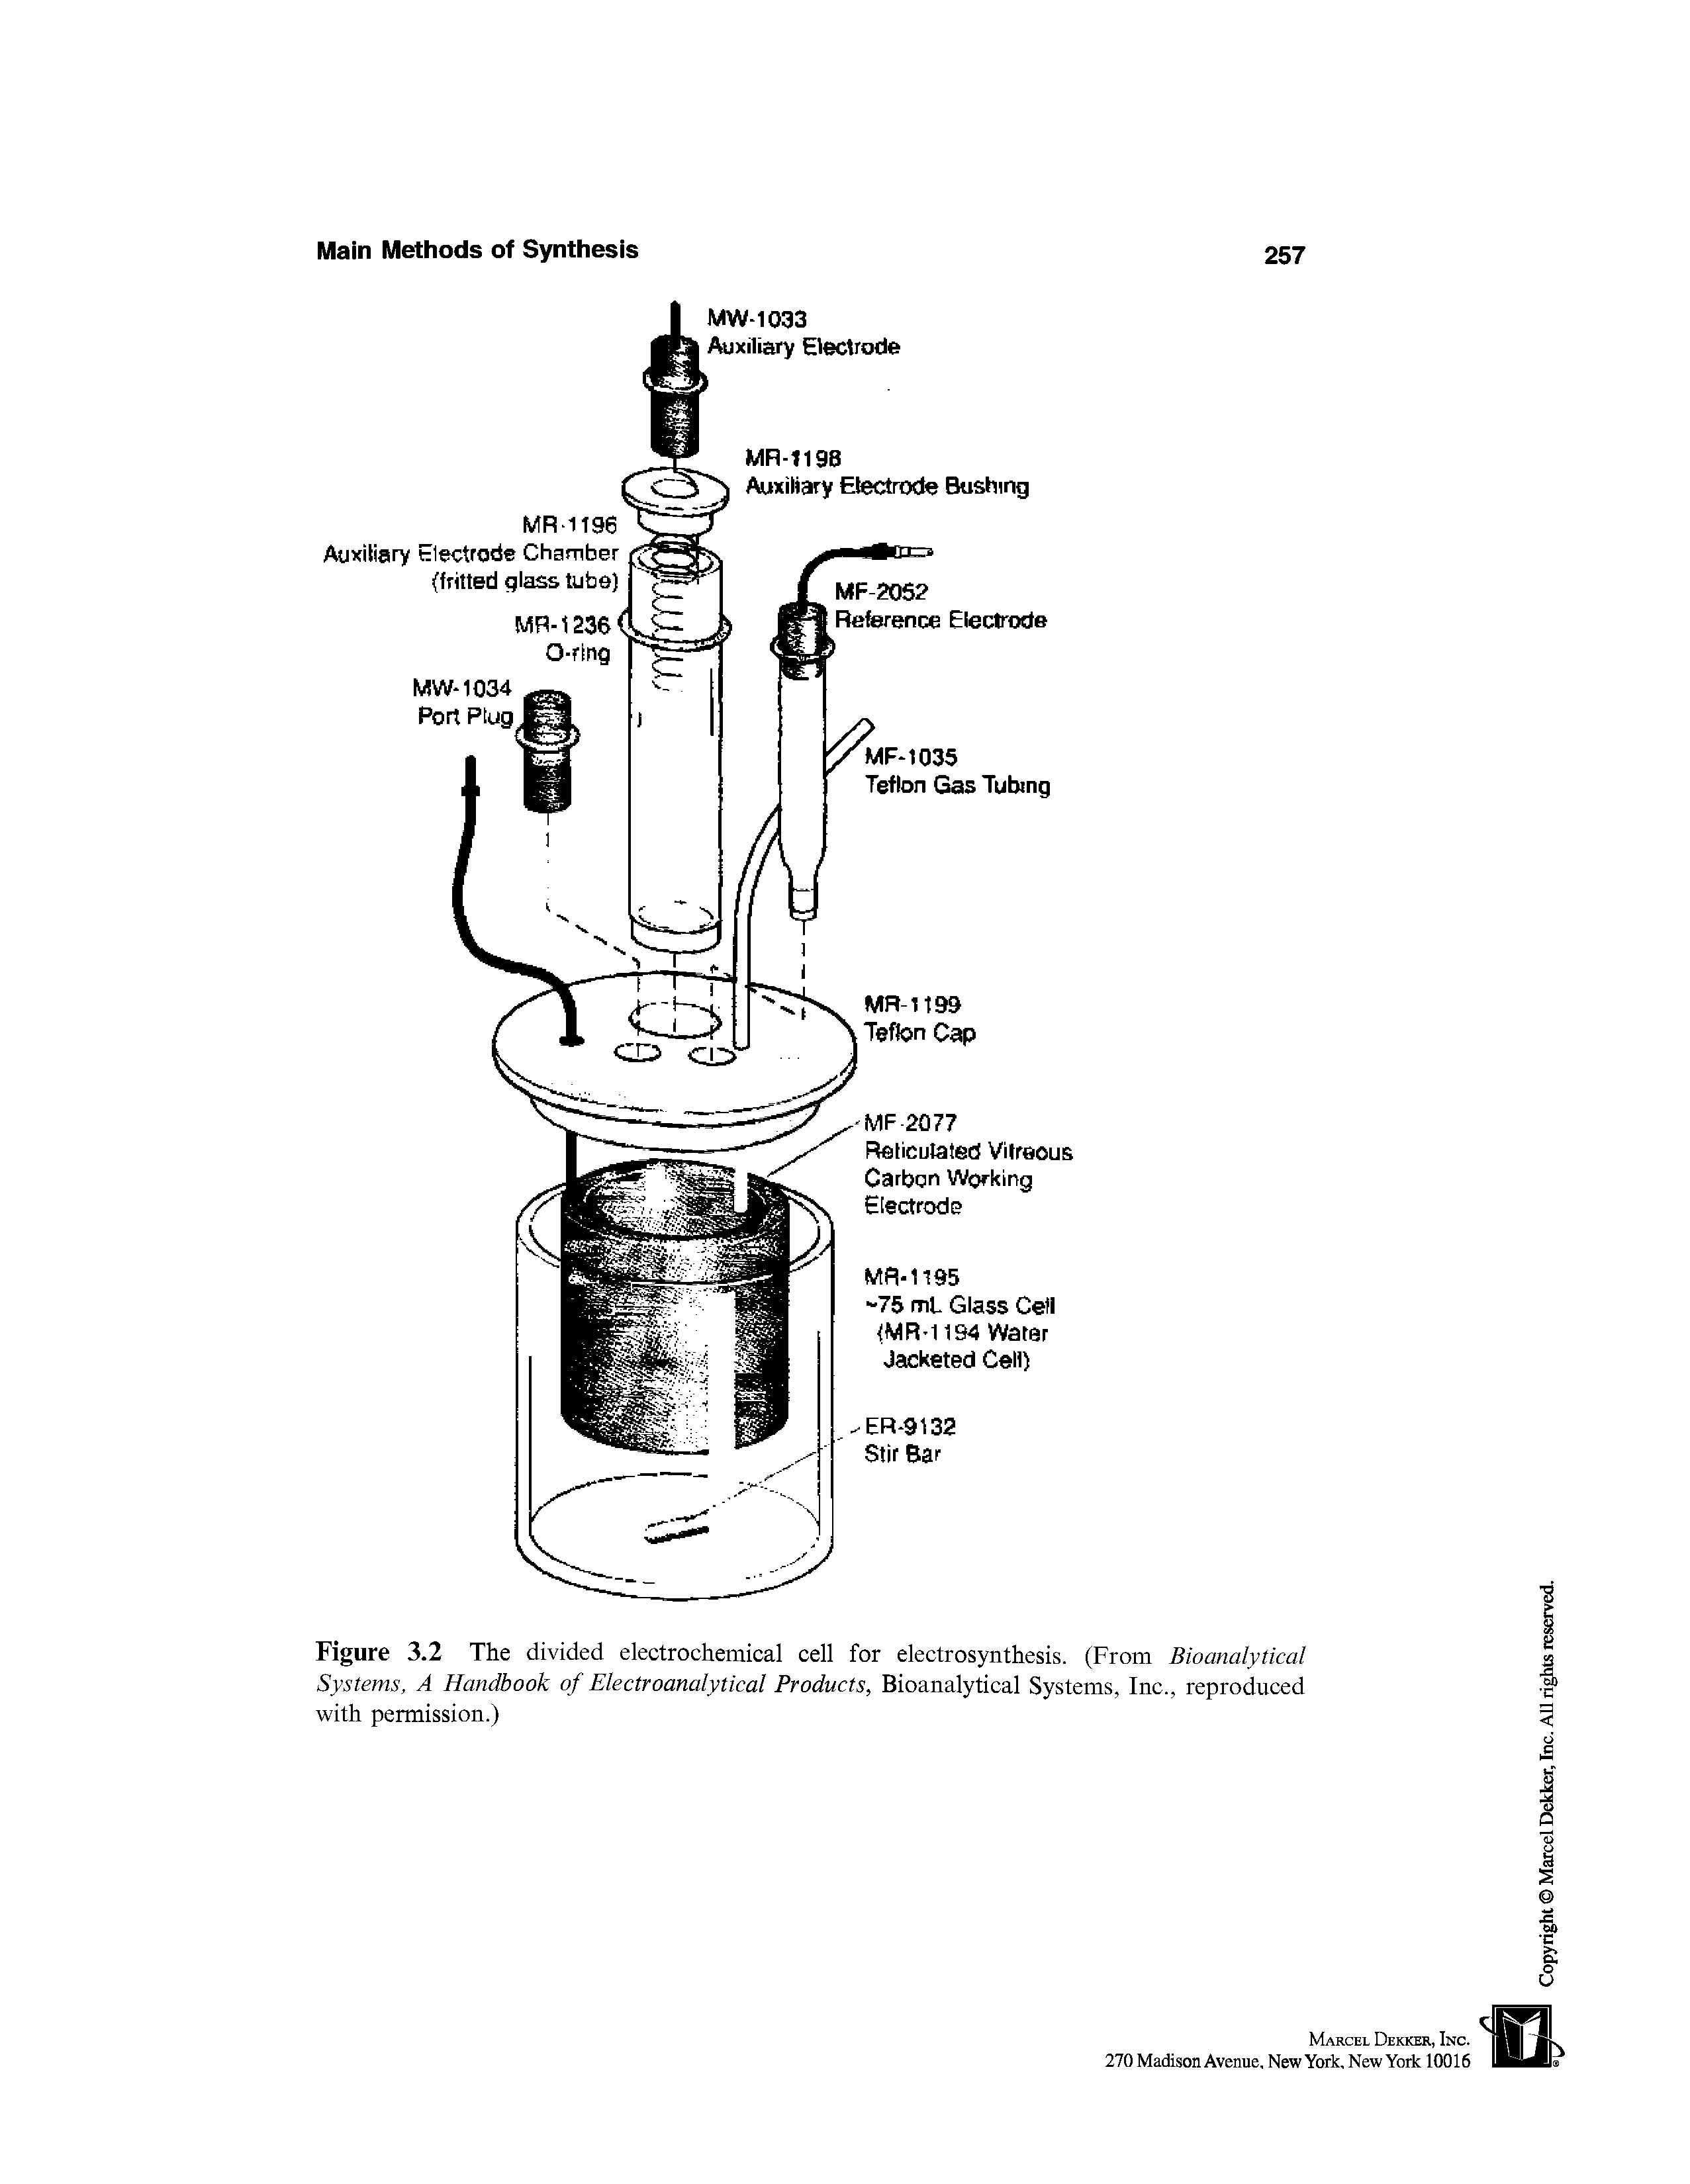 Figure 3.2 The divided electrochemical cell for electrosynthesis. (From Bioanalytical Systems, A Handbook of Electroanalytical Products, Bioanalytical Systems, Inc., reproduced with permission.)...